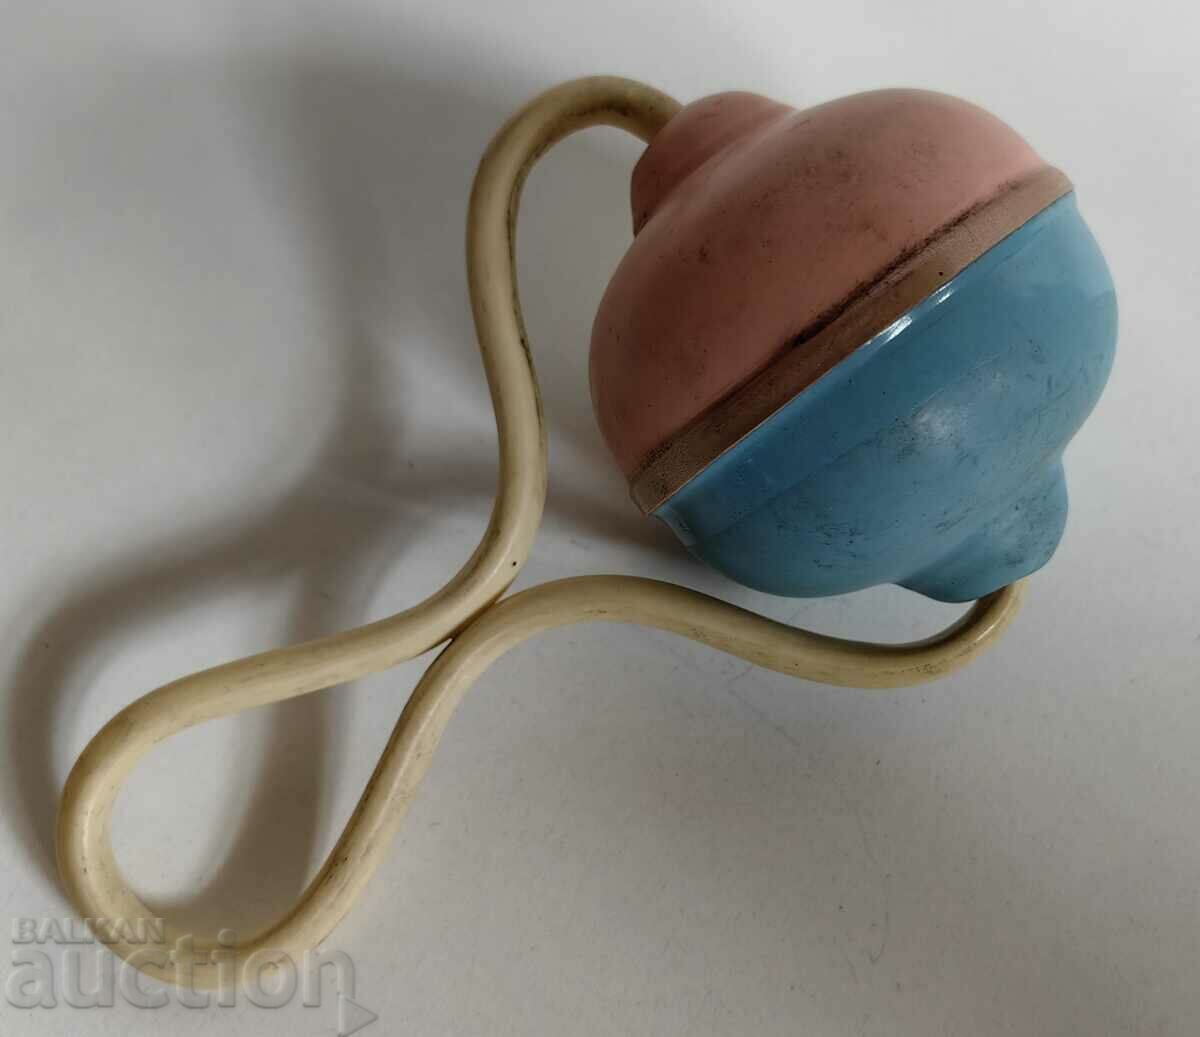 100 YEAR OLD CELLULOID BABY RATTLE